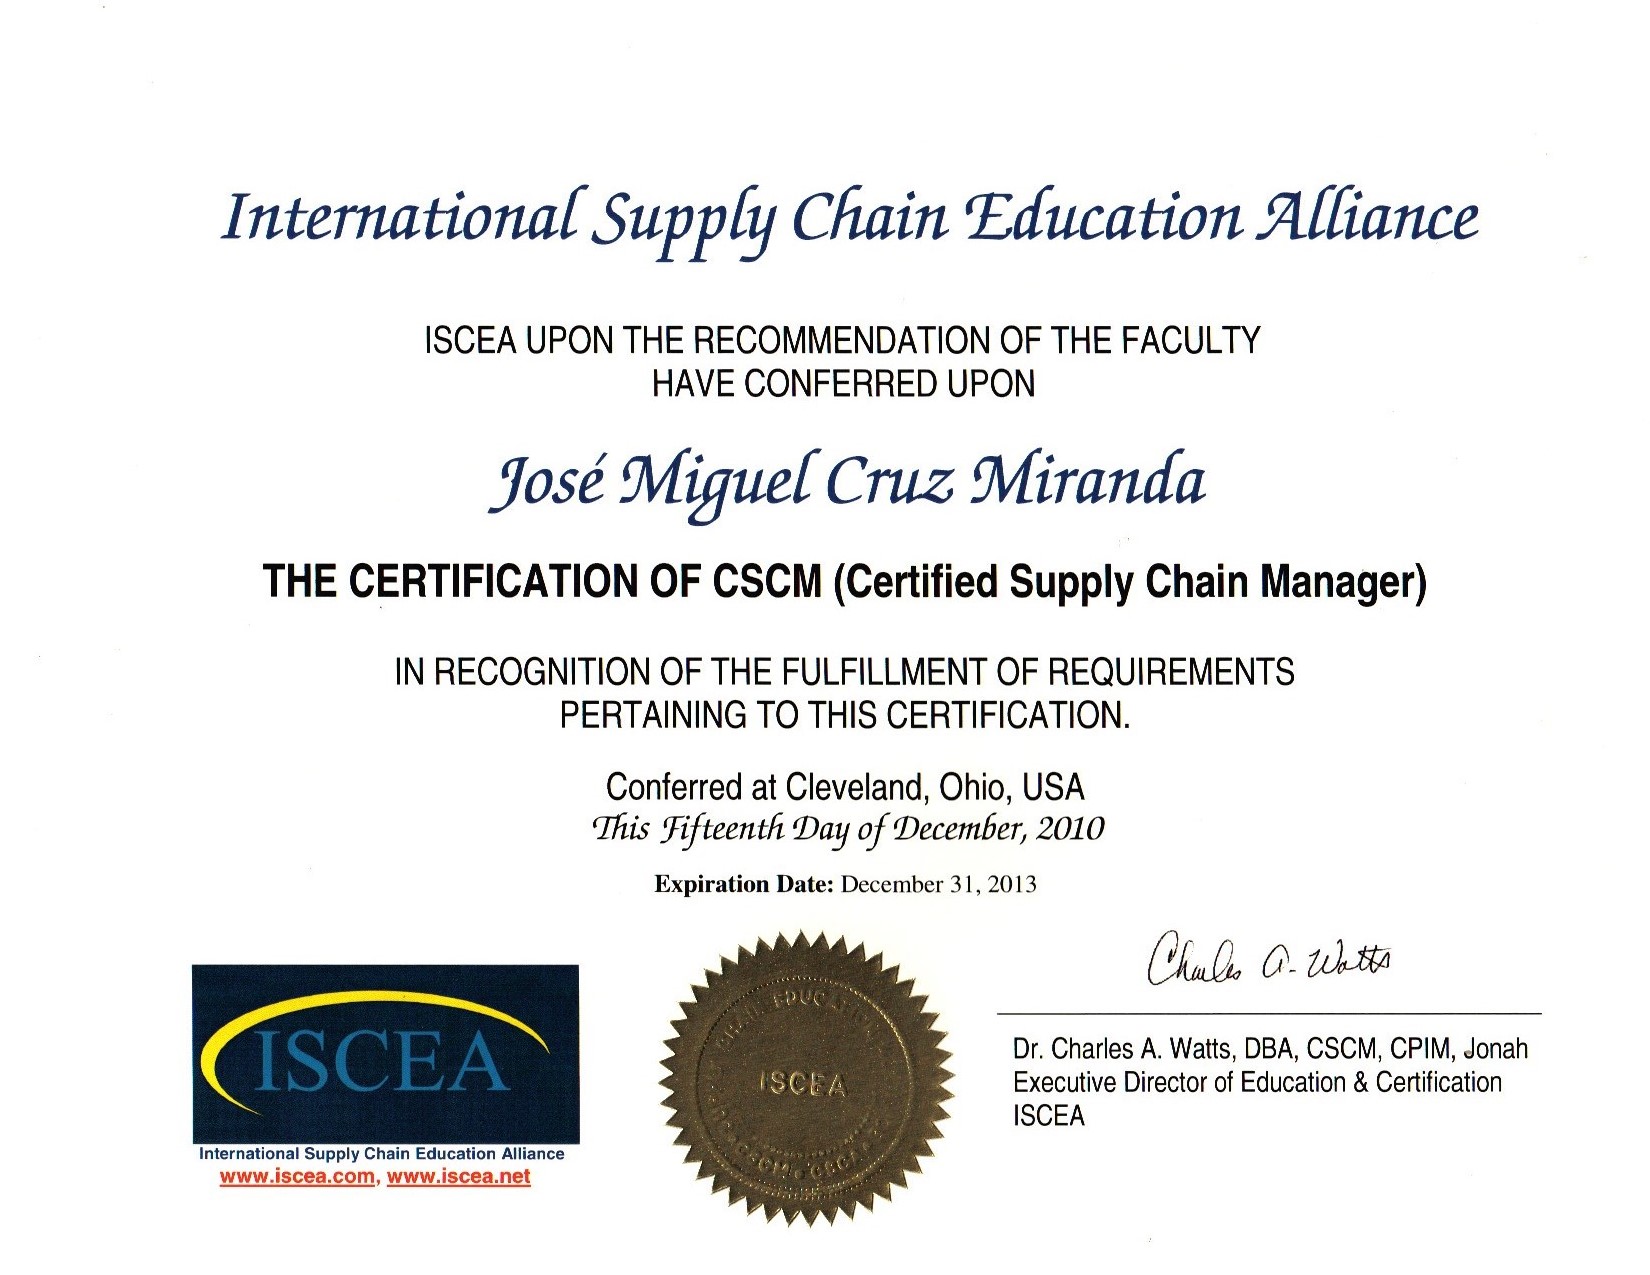 Certified Supply Chain Manager